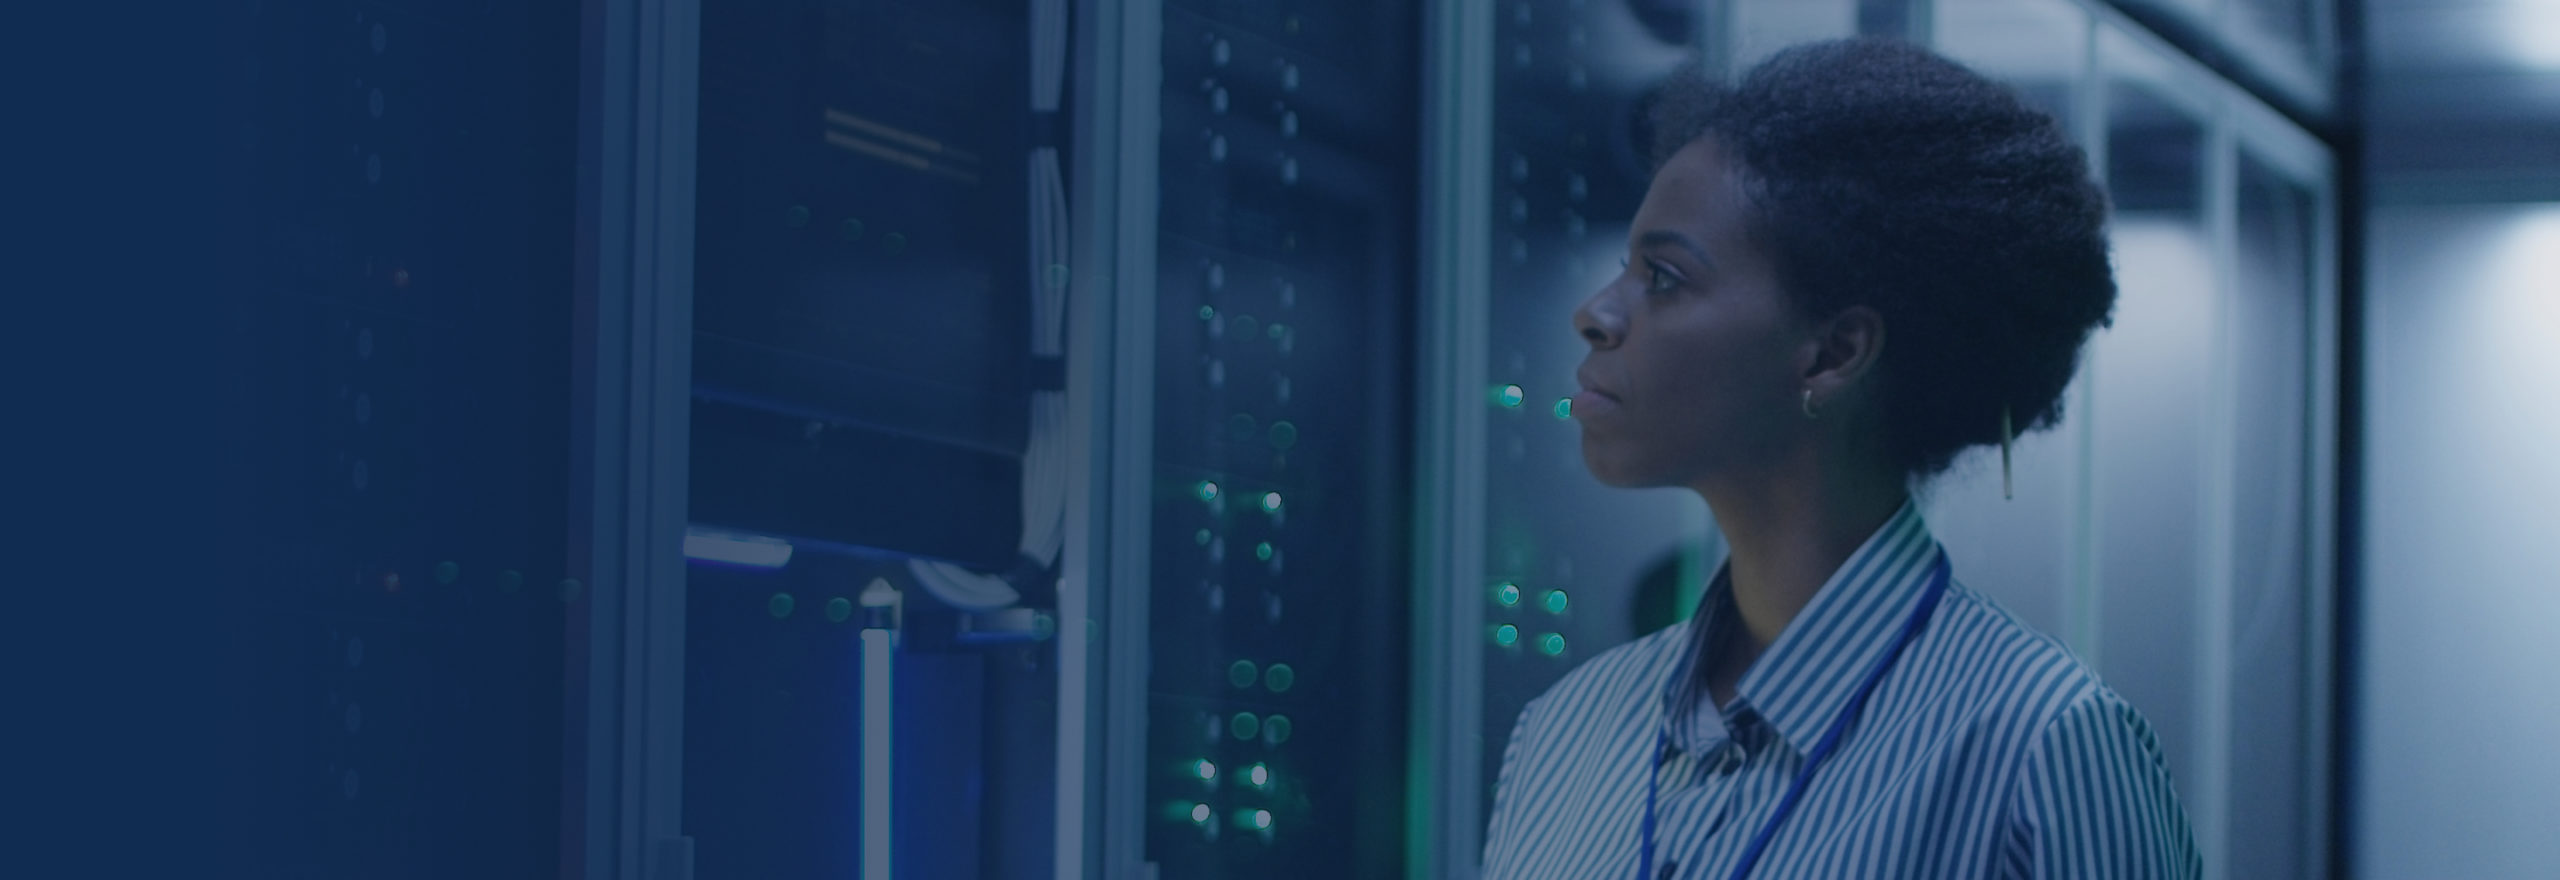 picture of woman providing network support and maintenance in data center